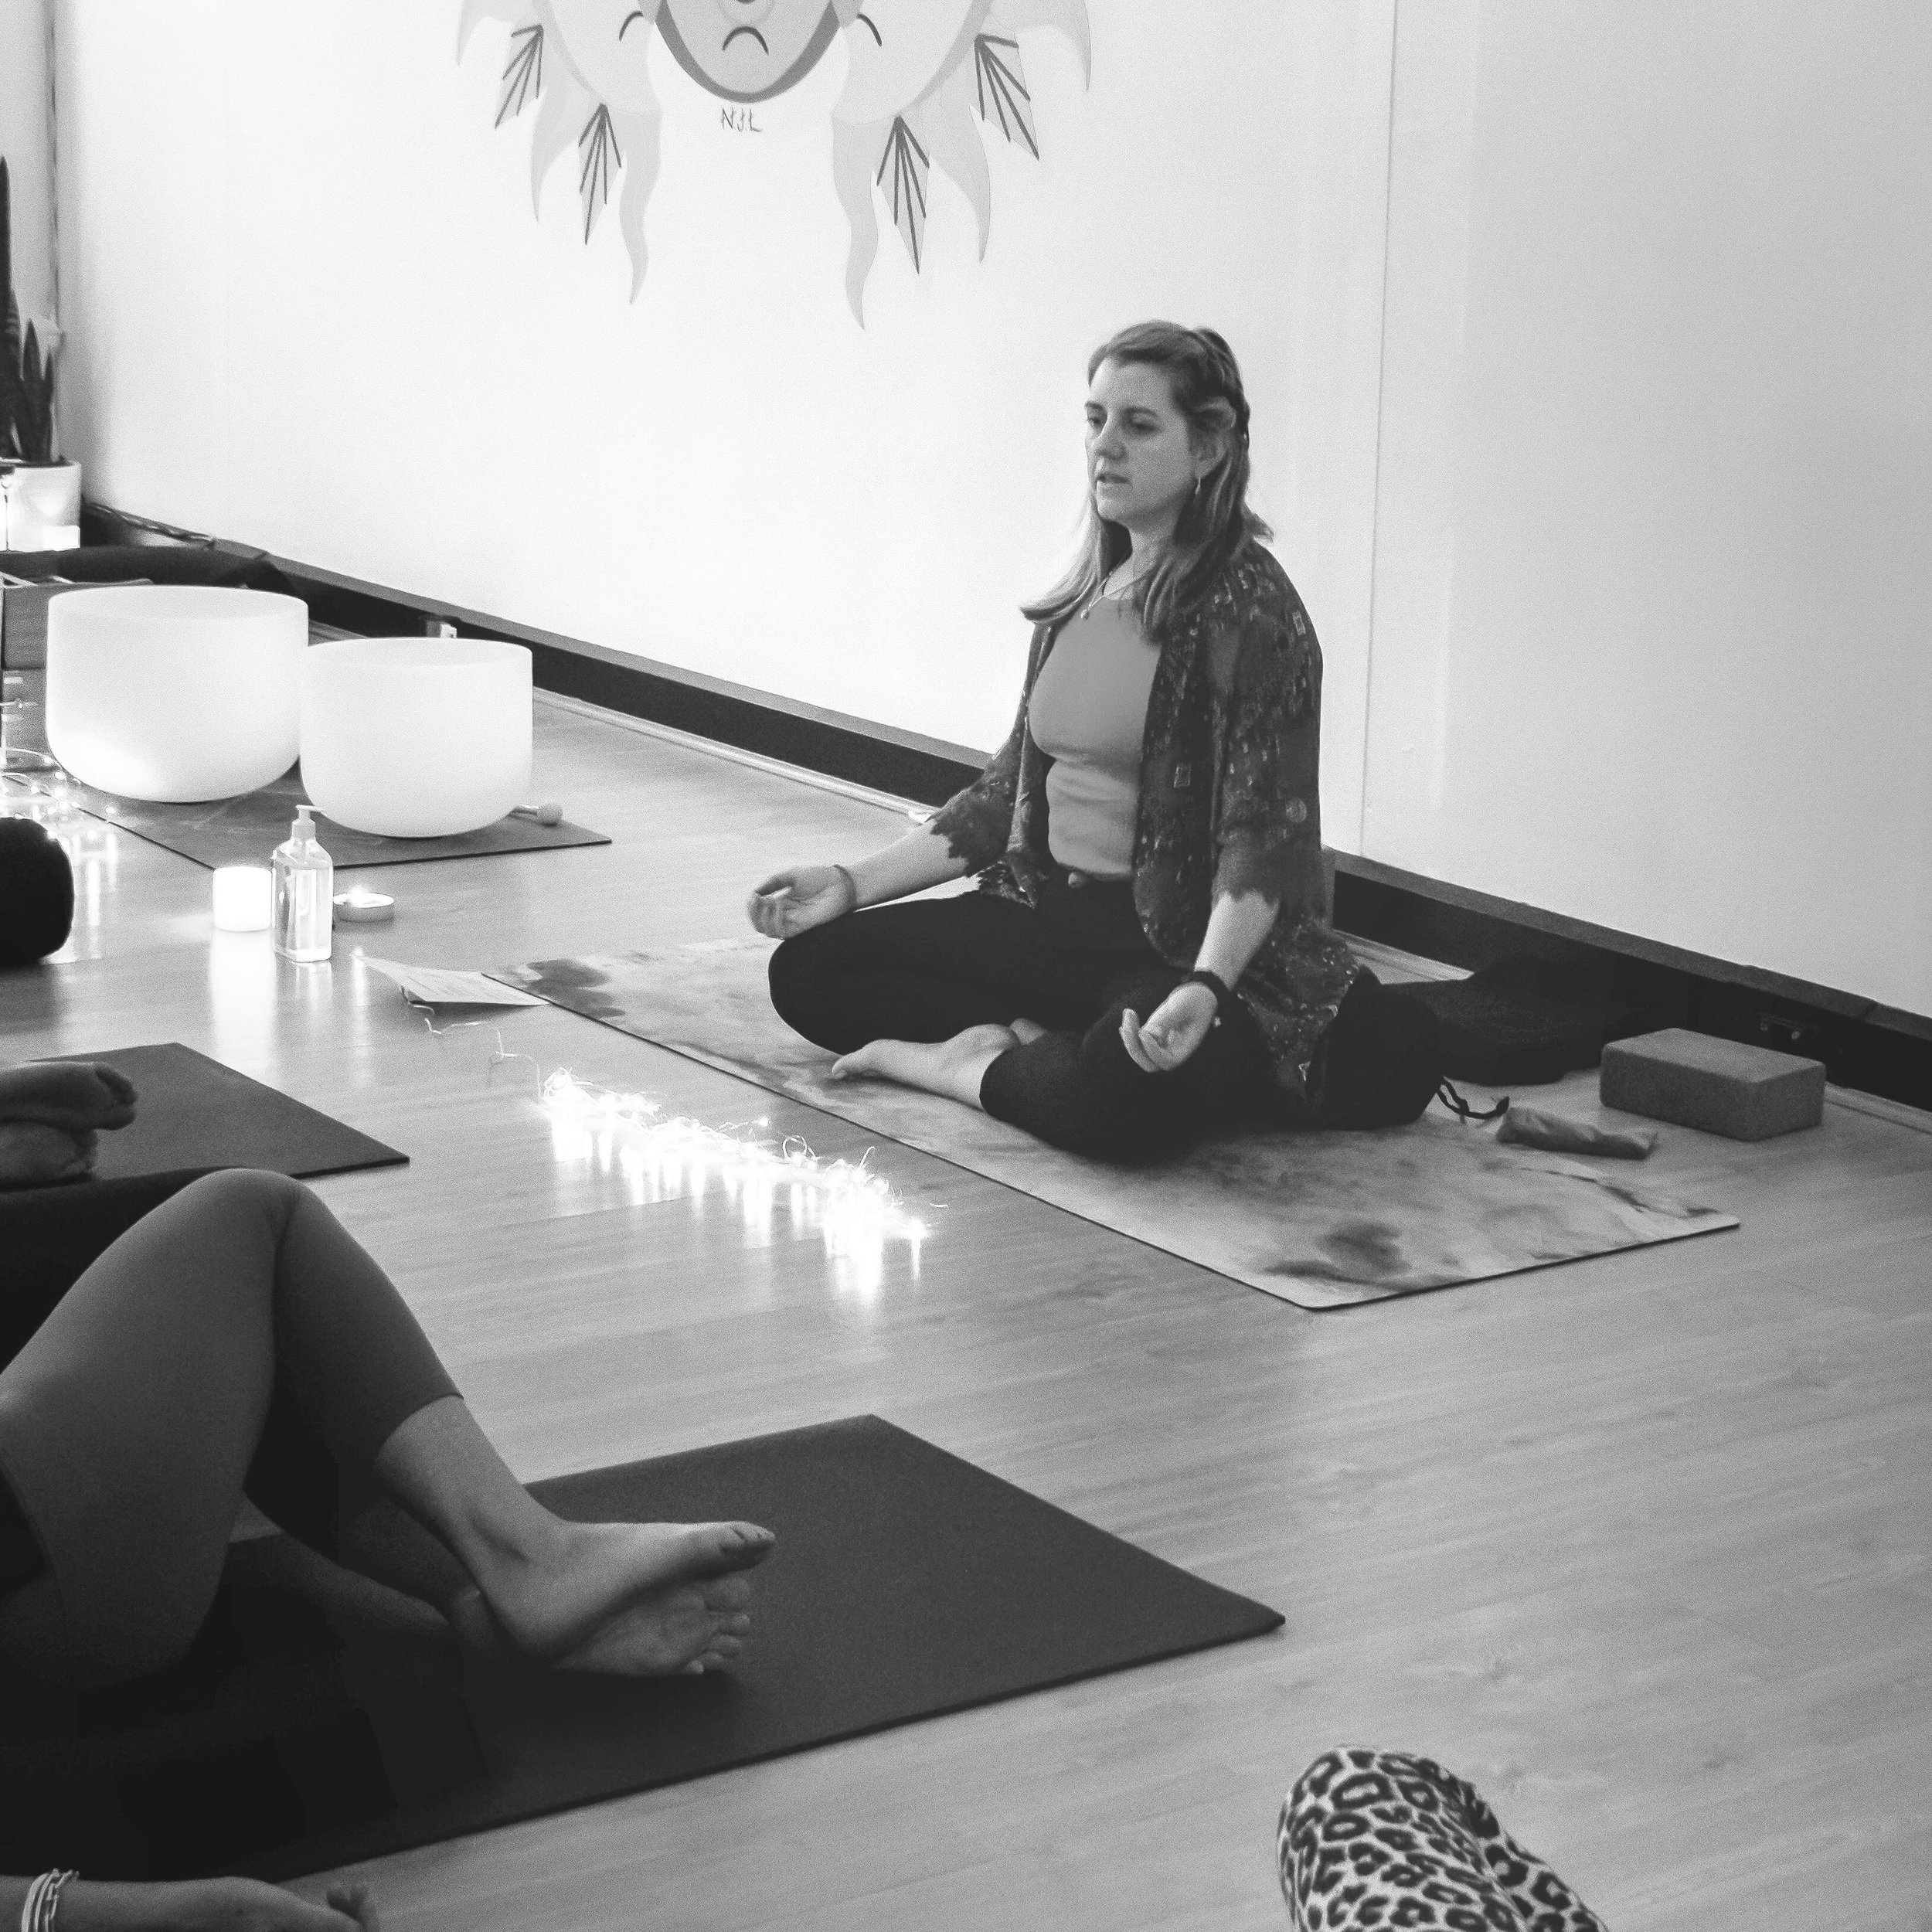 We are delighted to welcome Kerry back to Shala to guide you through YIN YANG NIDRA this Sunday at 4.30pm 🙏

Kerry was a regular teacher at Shala a few years ago before moving to Perth for a year. In this time, Kerry has been dedicated to developing